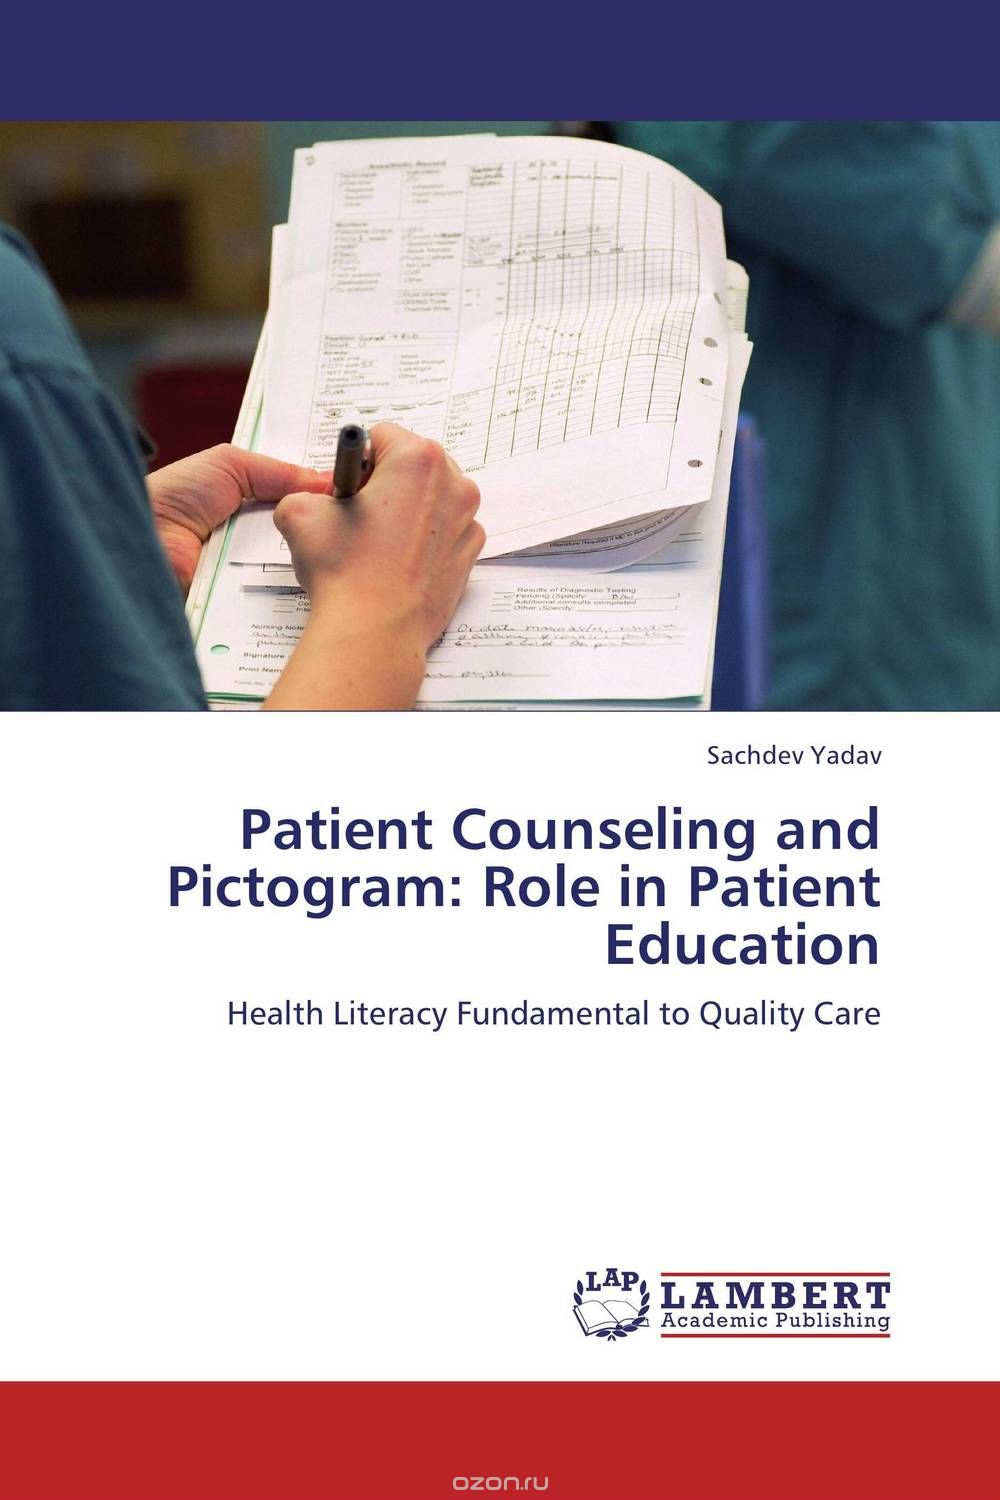 Скачать книгу "Patient Counseling and Pictogram: Role in Patient Education"